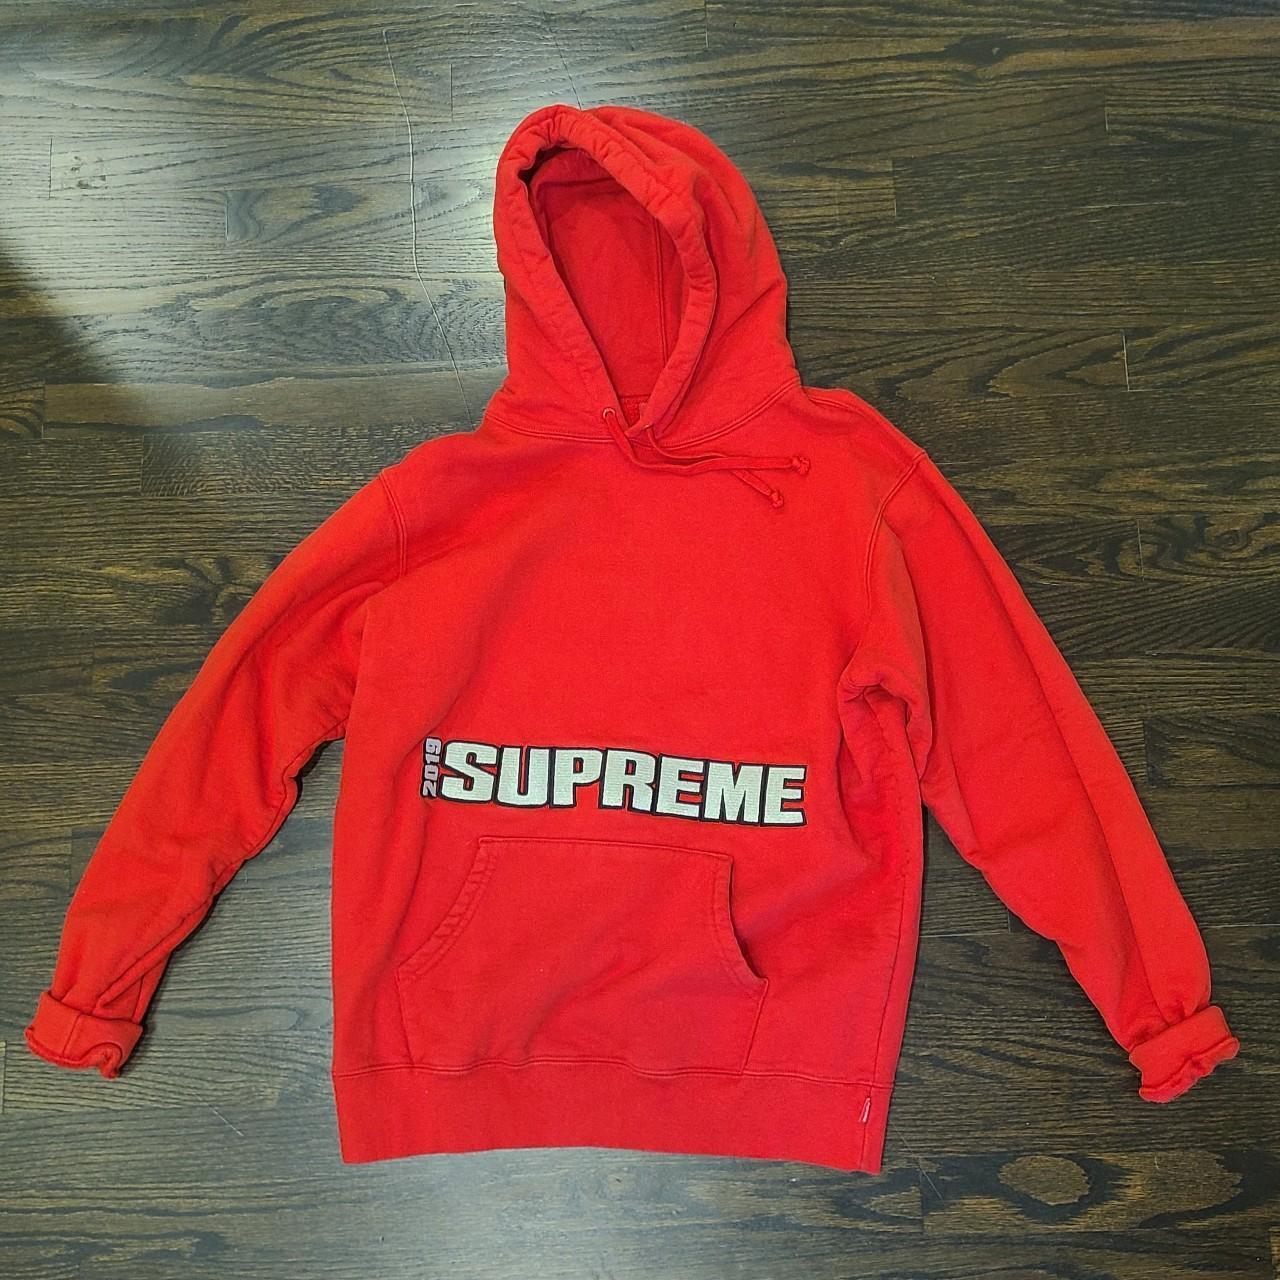 Supreme 2019 Red Blockbuster Hoodie. Barely worn and...